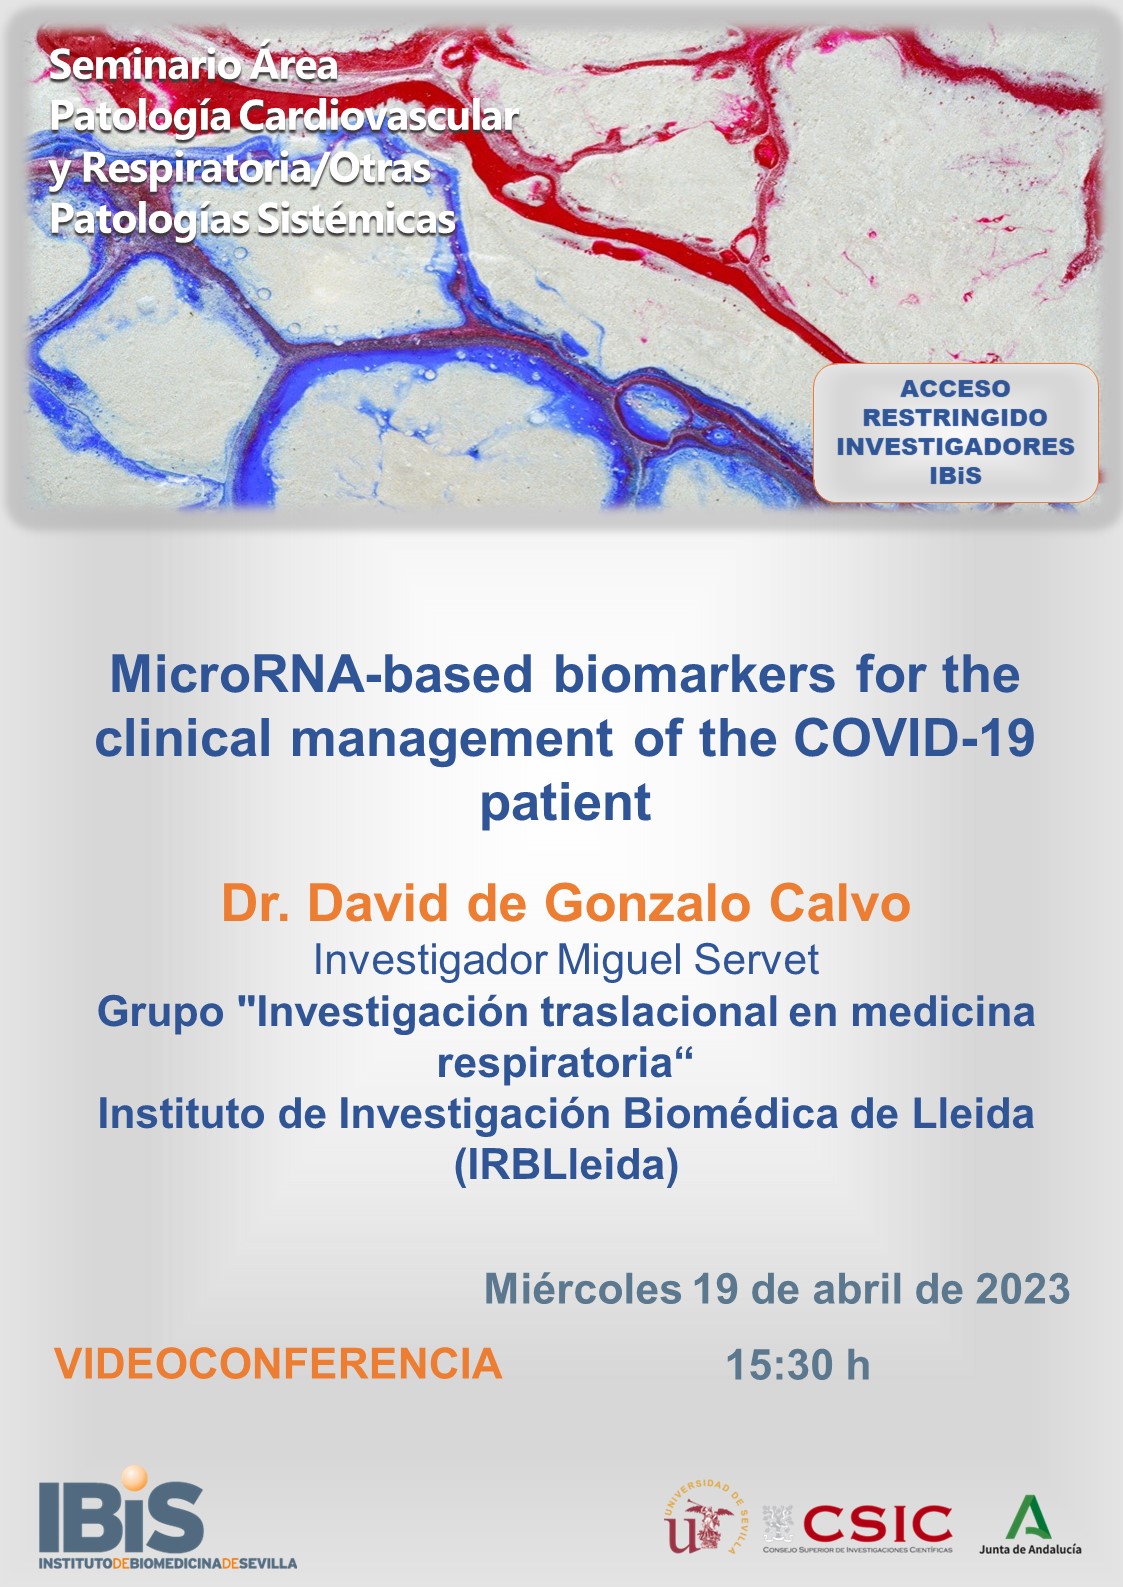 Poster: MicroRNA-based biomarkers for the clinical management of the COVID-19 patient